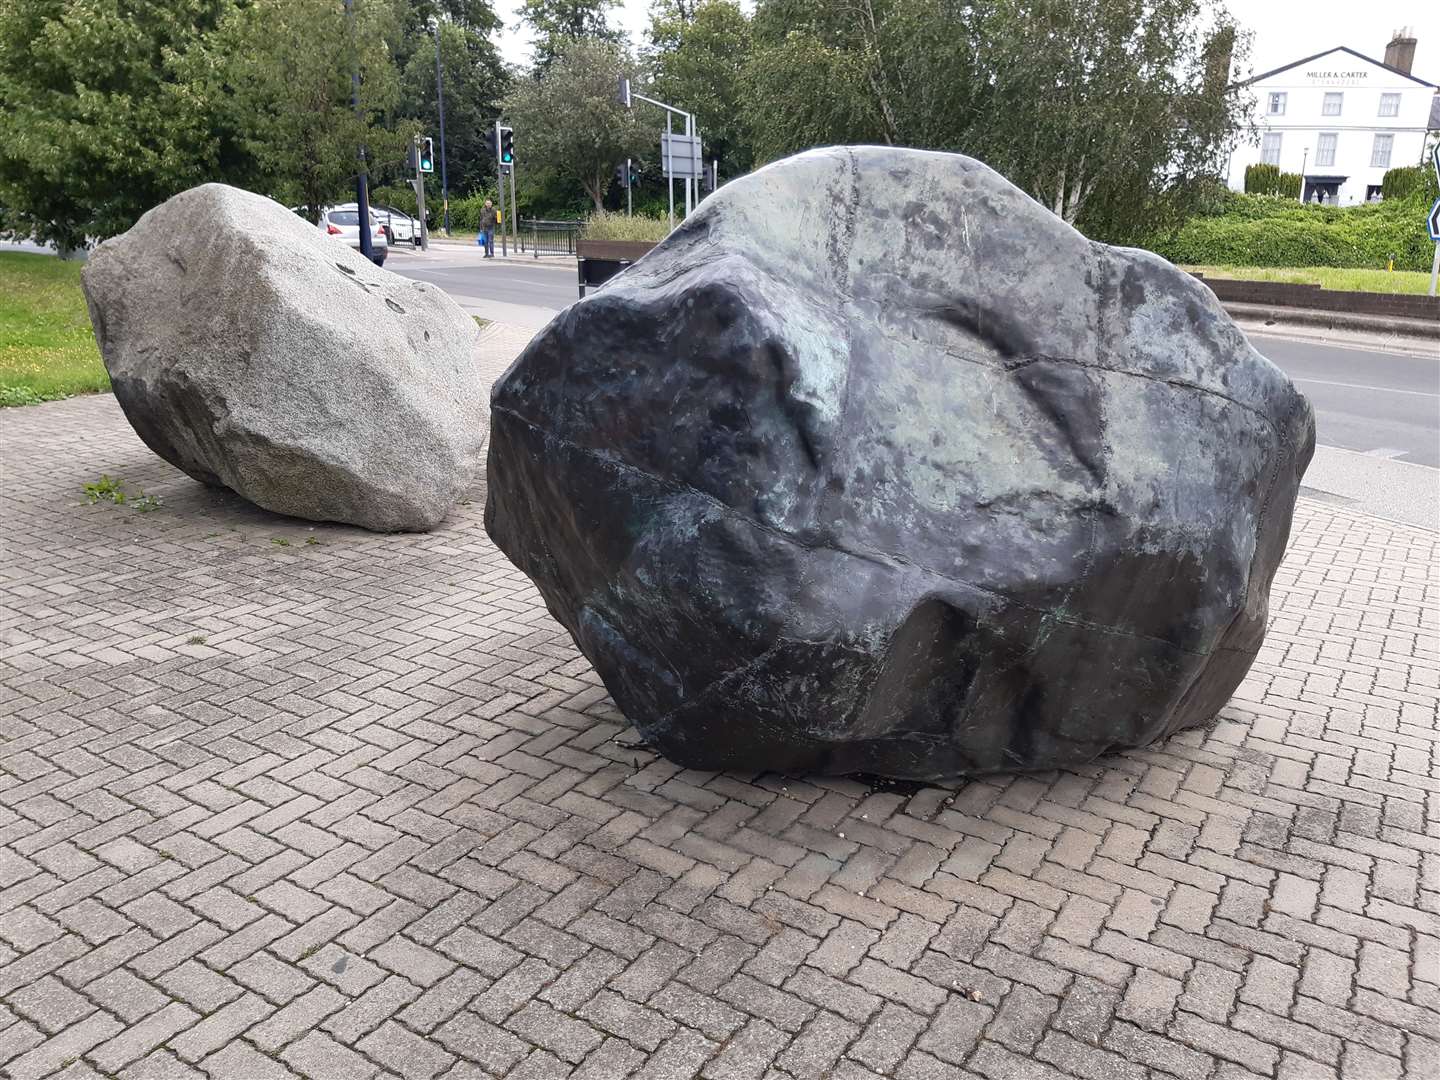 The Antony Gormley boulders outside the Kent History and Library Centre, Maidstone